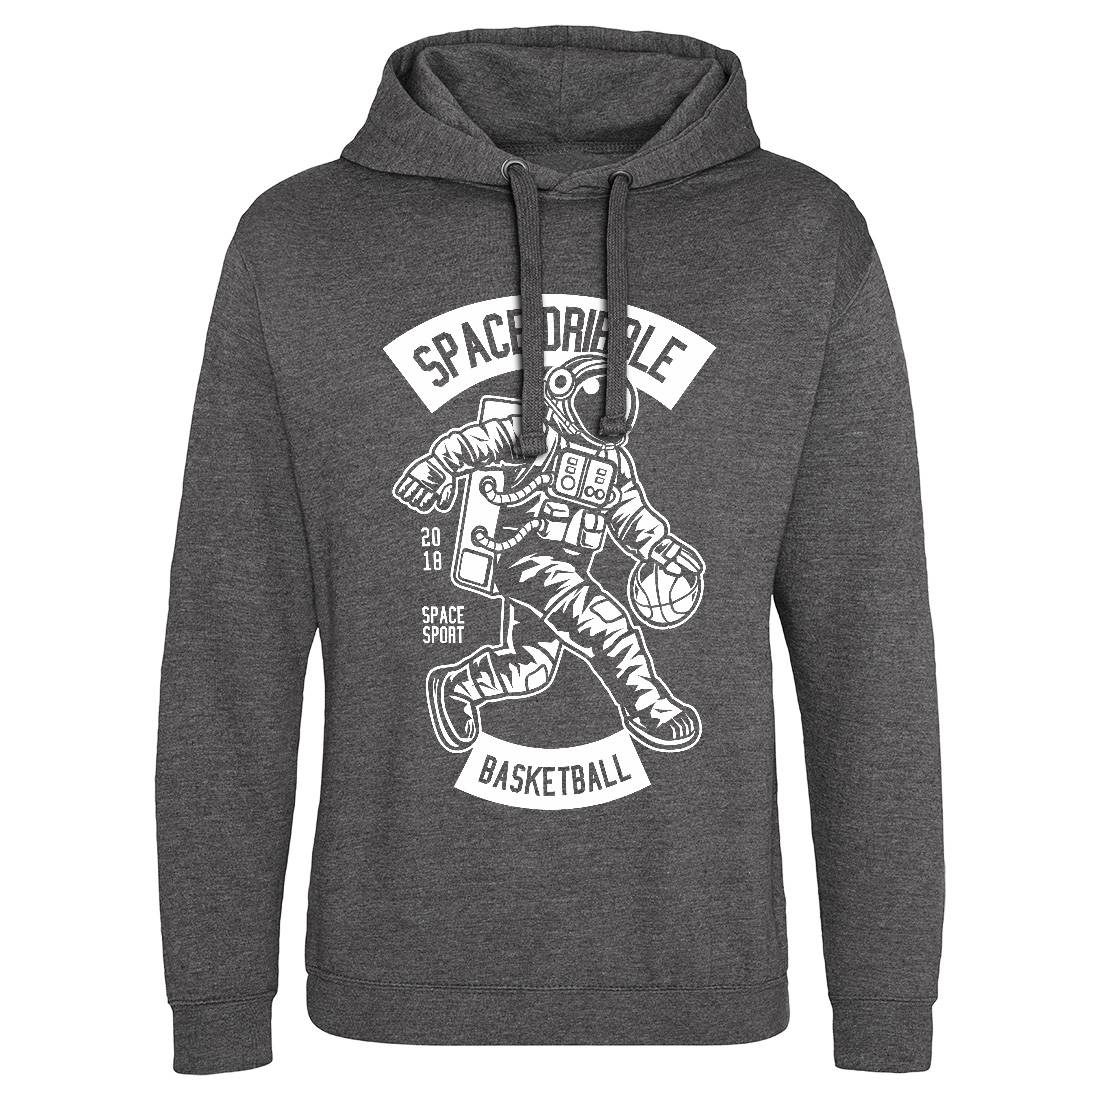 Dribble Mens Hoodie Without Pocket Space B635